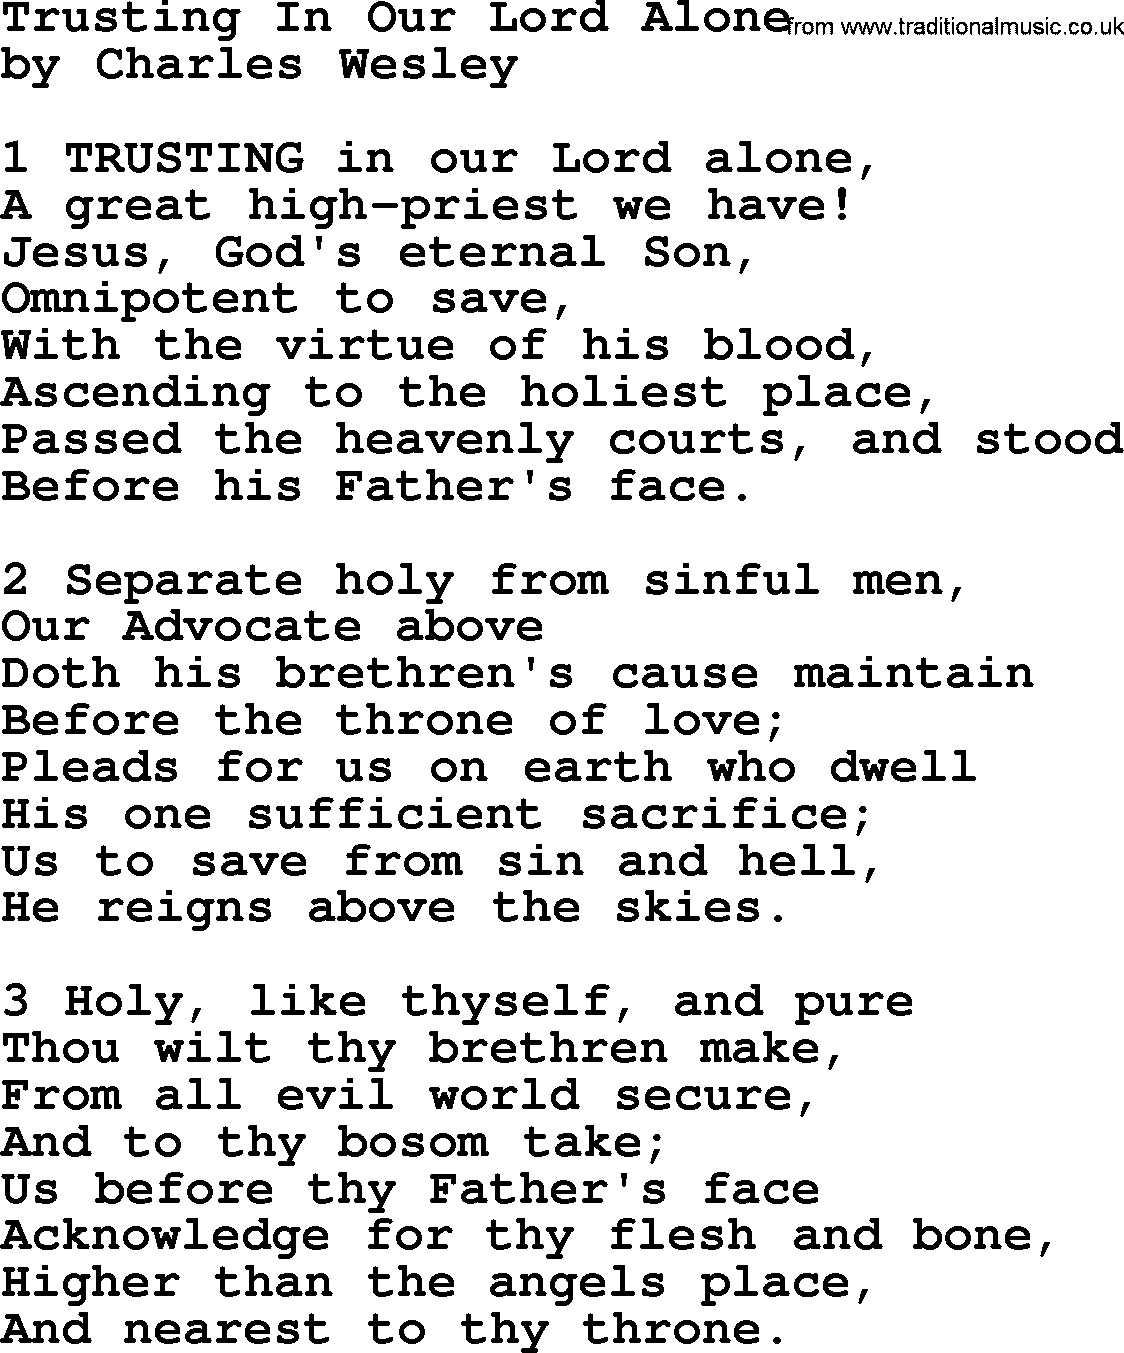 Charles Wesley hymn: Trusting In Our Lord Alone, lyrics